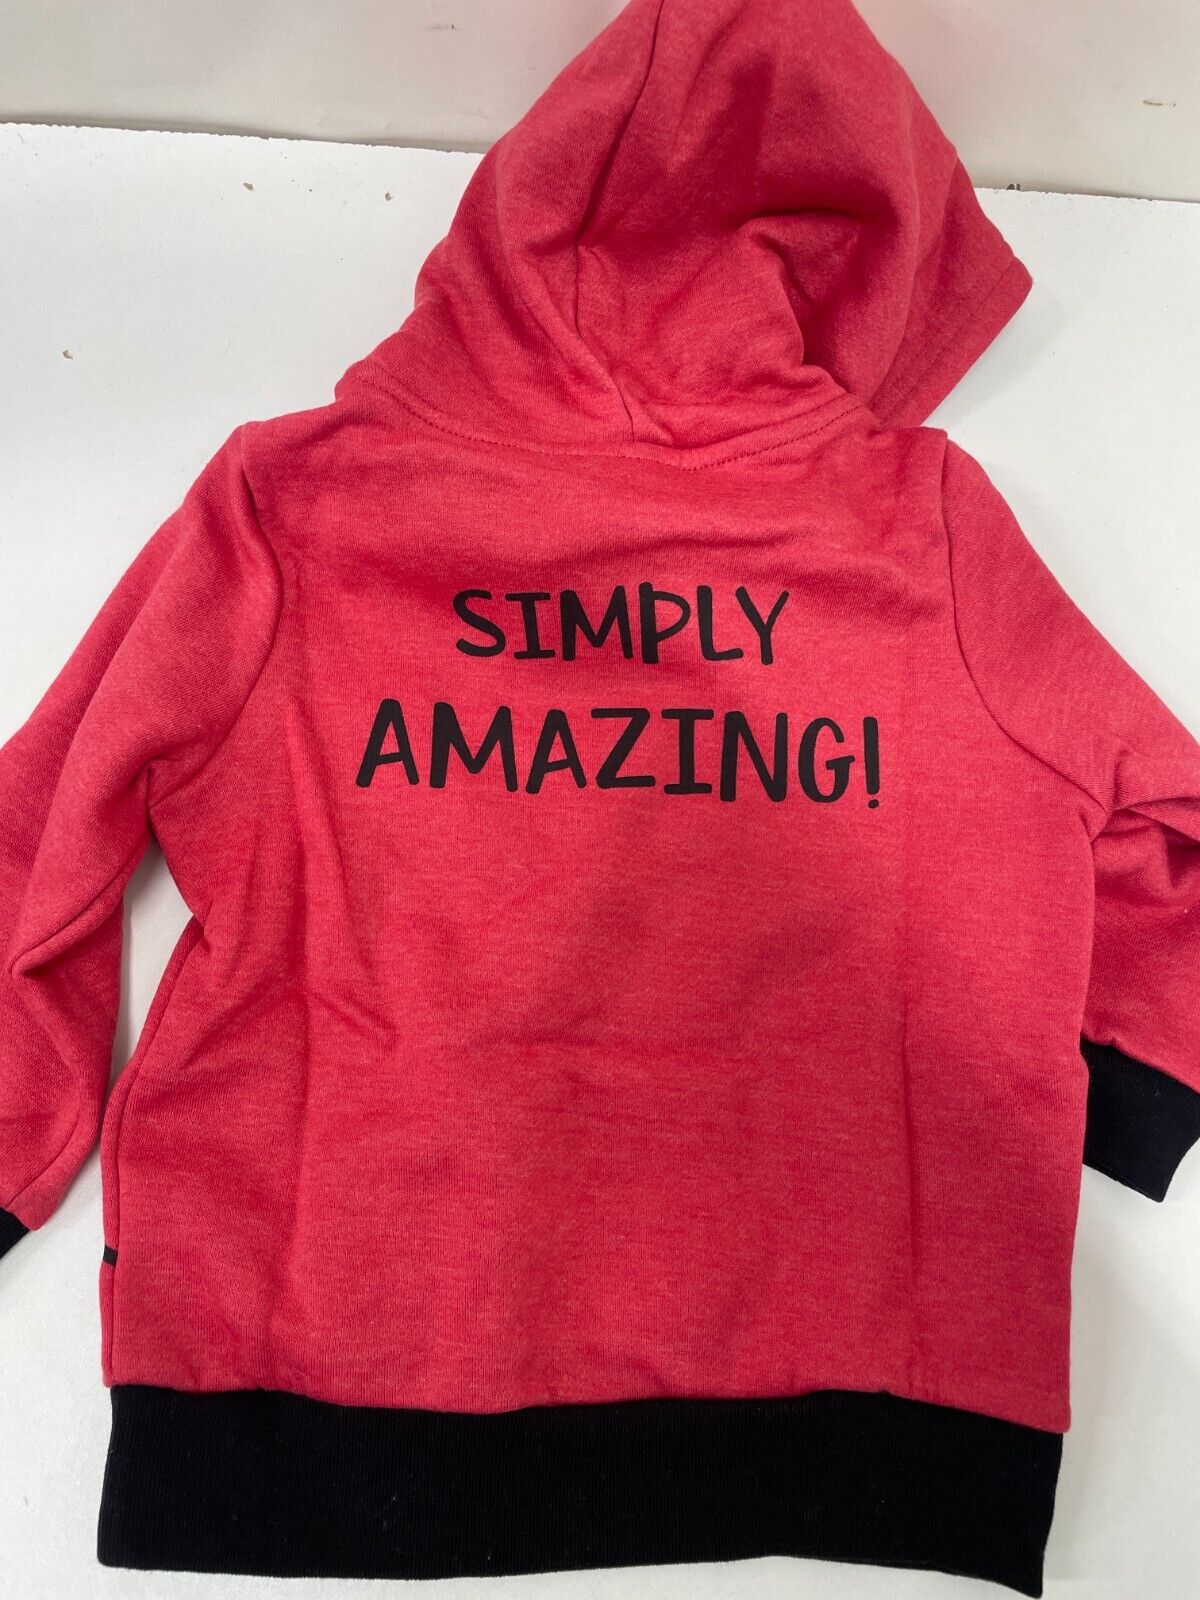 Marvel Toddler 3T Spiderman Simply Amazing Hoodie Jacket Red Black Pullover